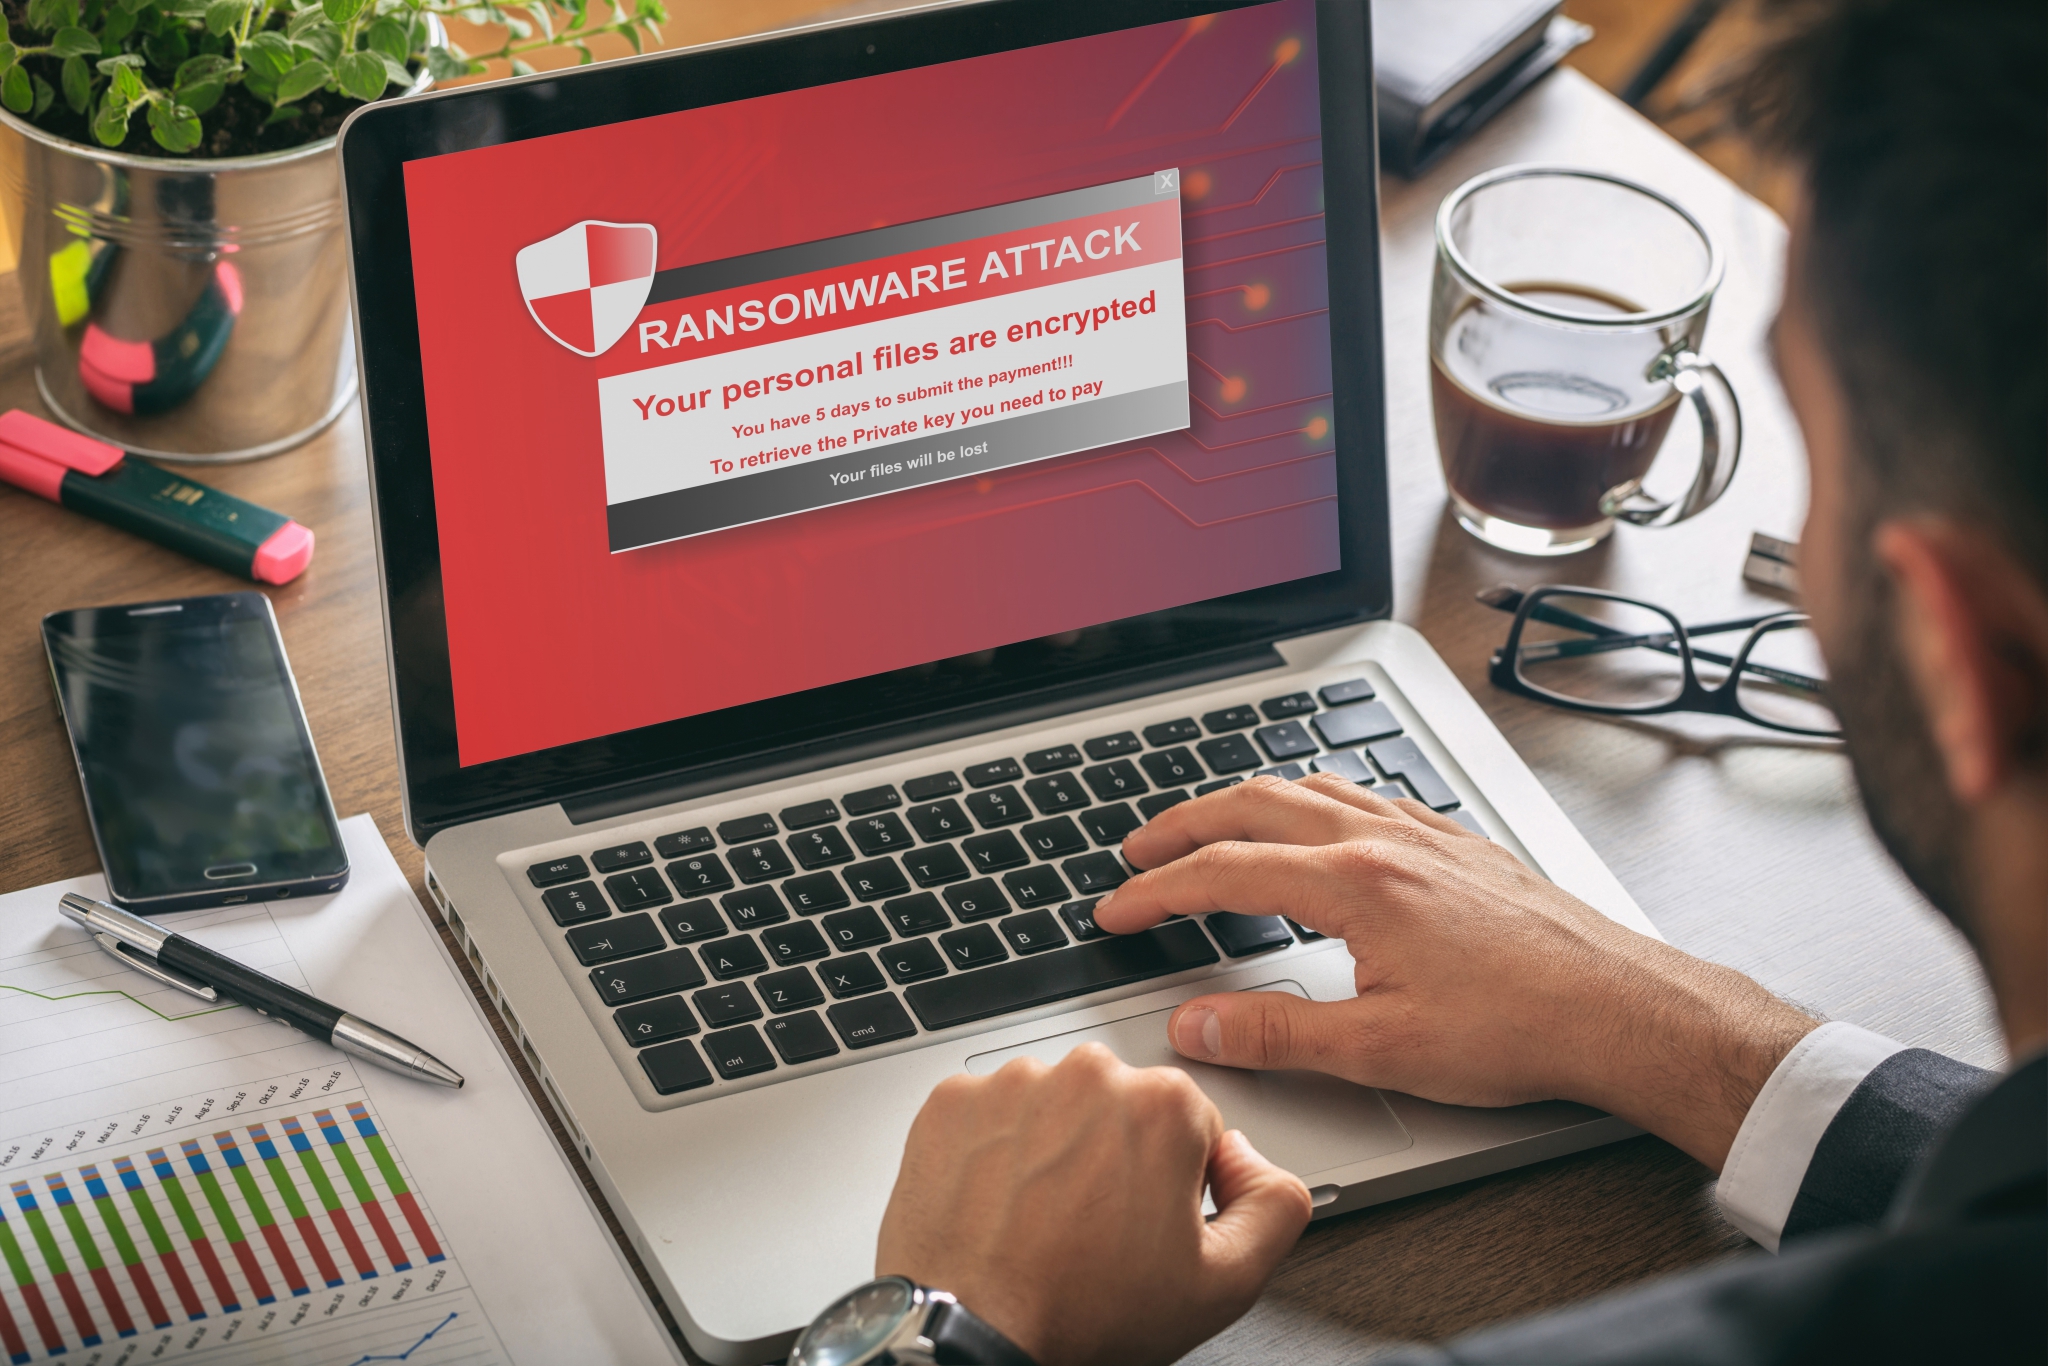 Live simulation: Watch as a Windows laptop suffers a ransomware attack,  understand the malware's inner workings and learn how cybersecurity  experts... | By Acronis | Facebook